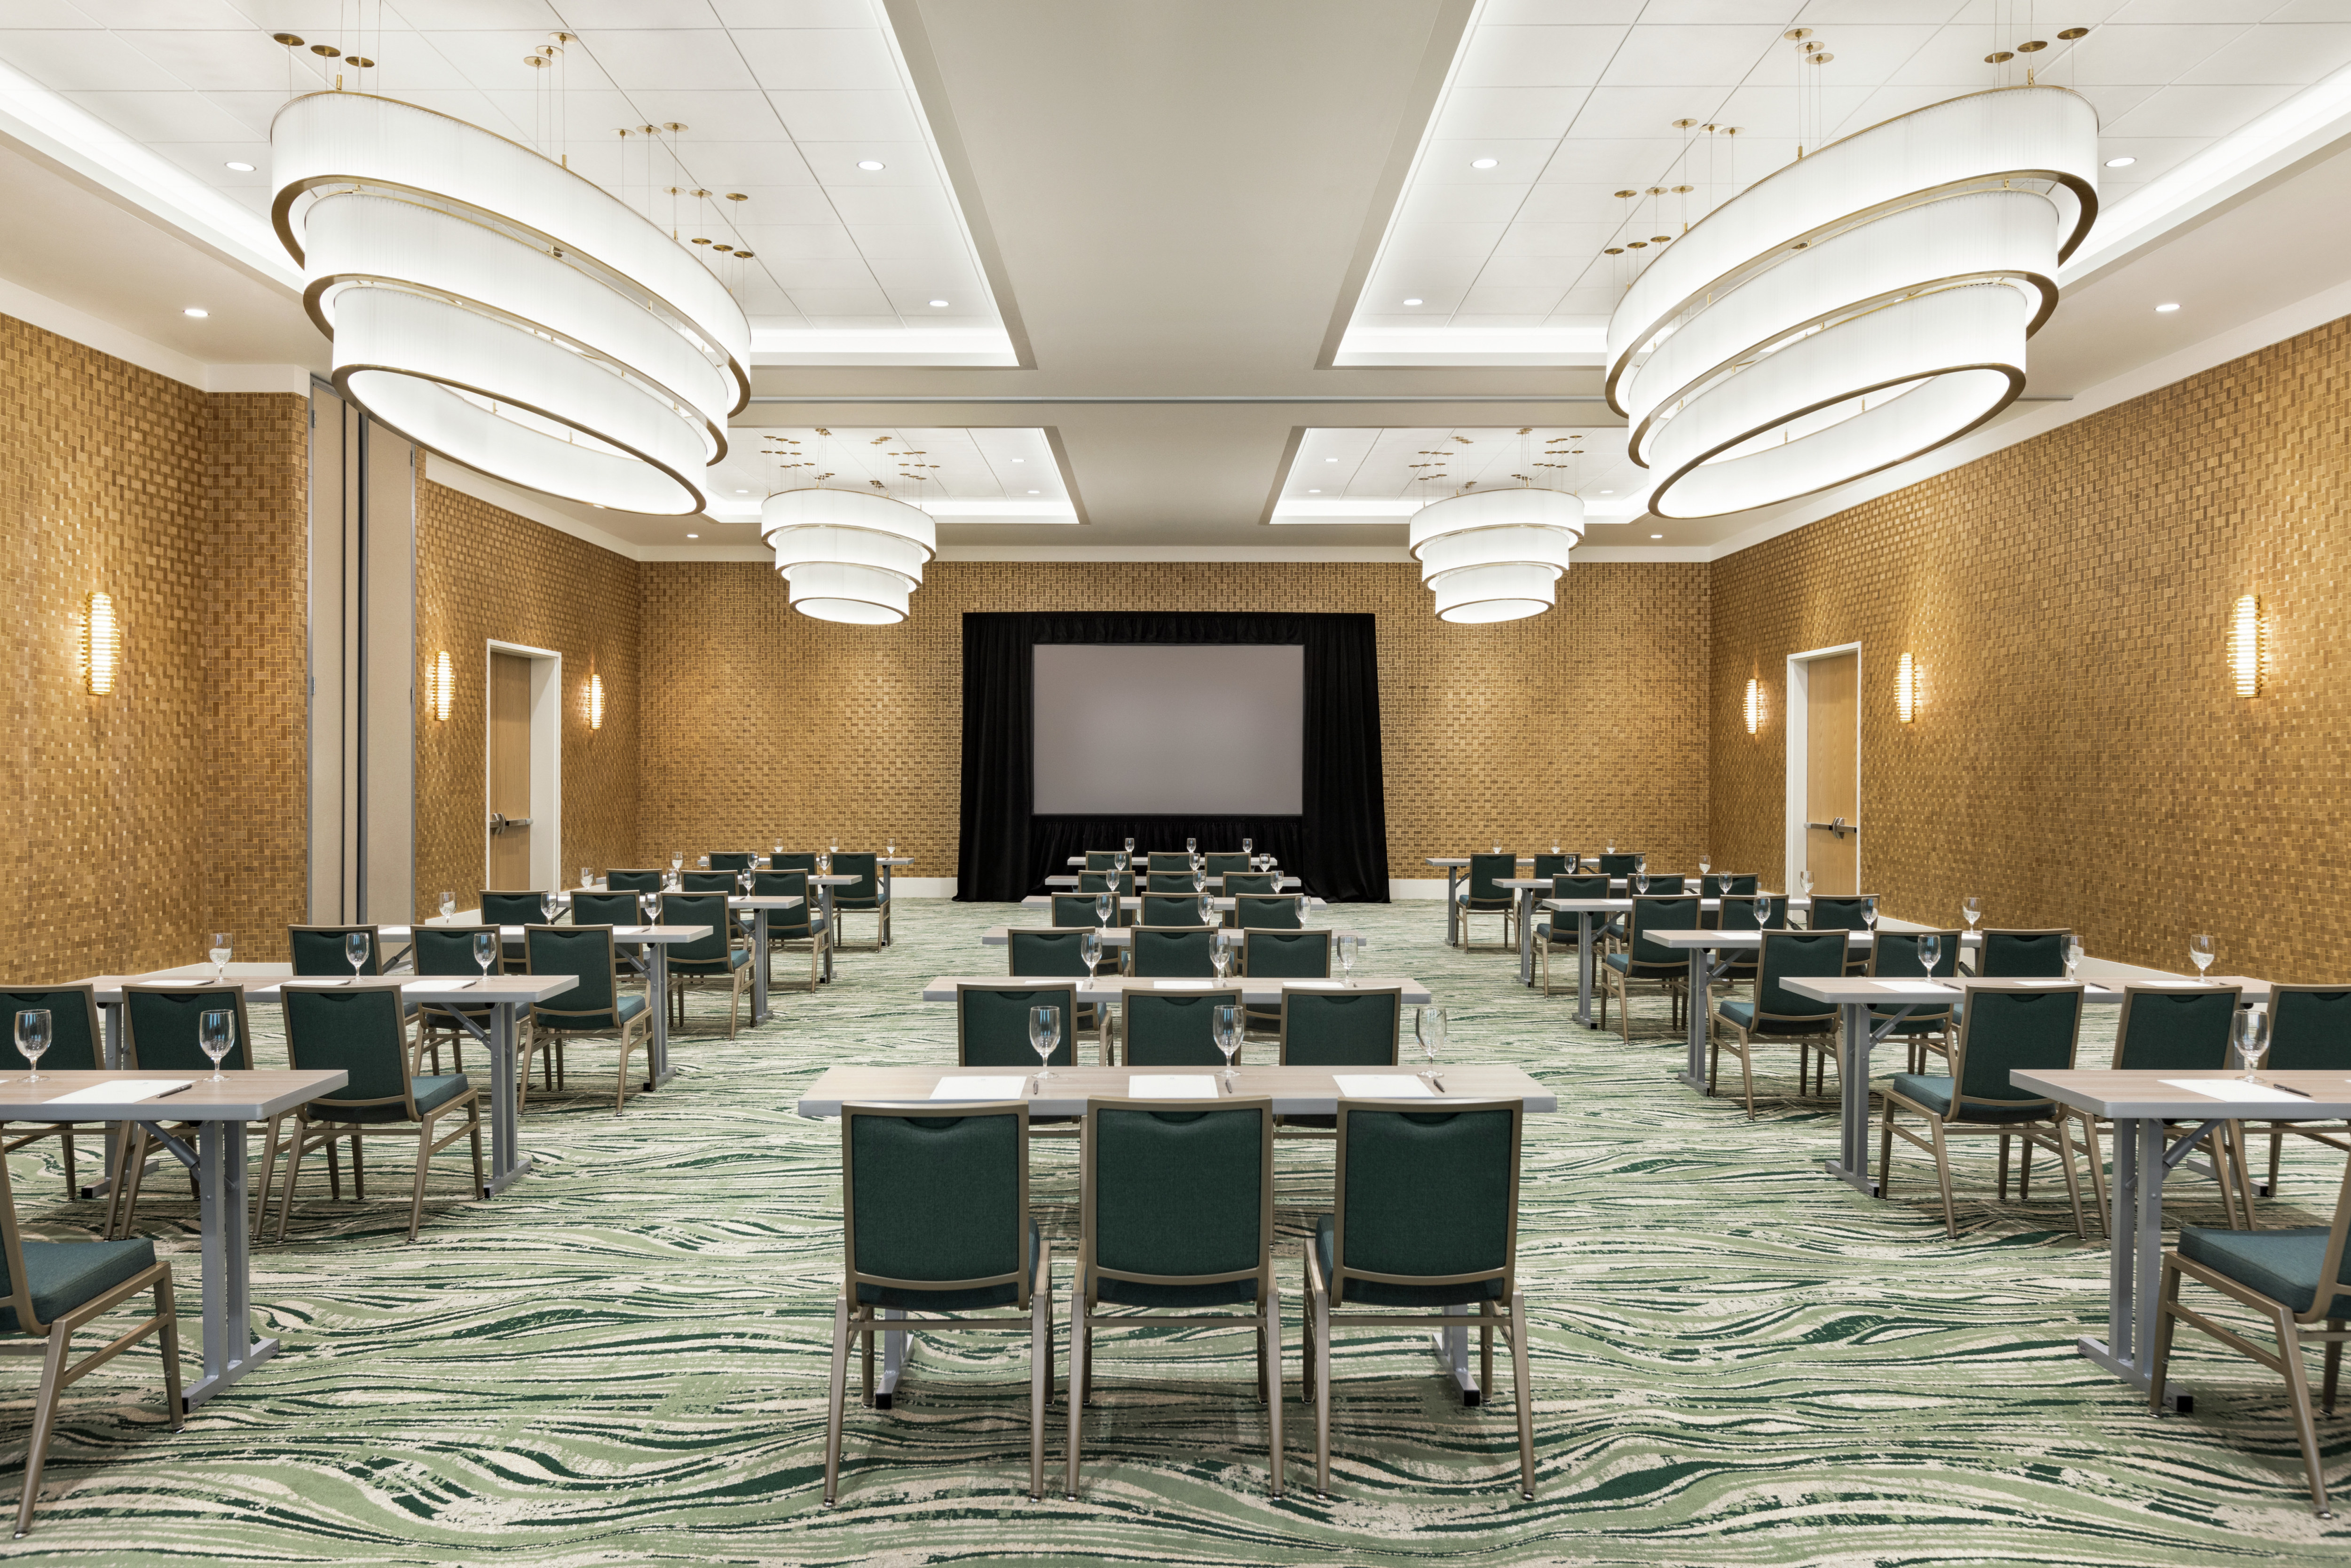 Convenient, oversized, on-site meeting room with classroom table set up and large projector screen at front of room